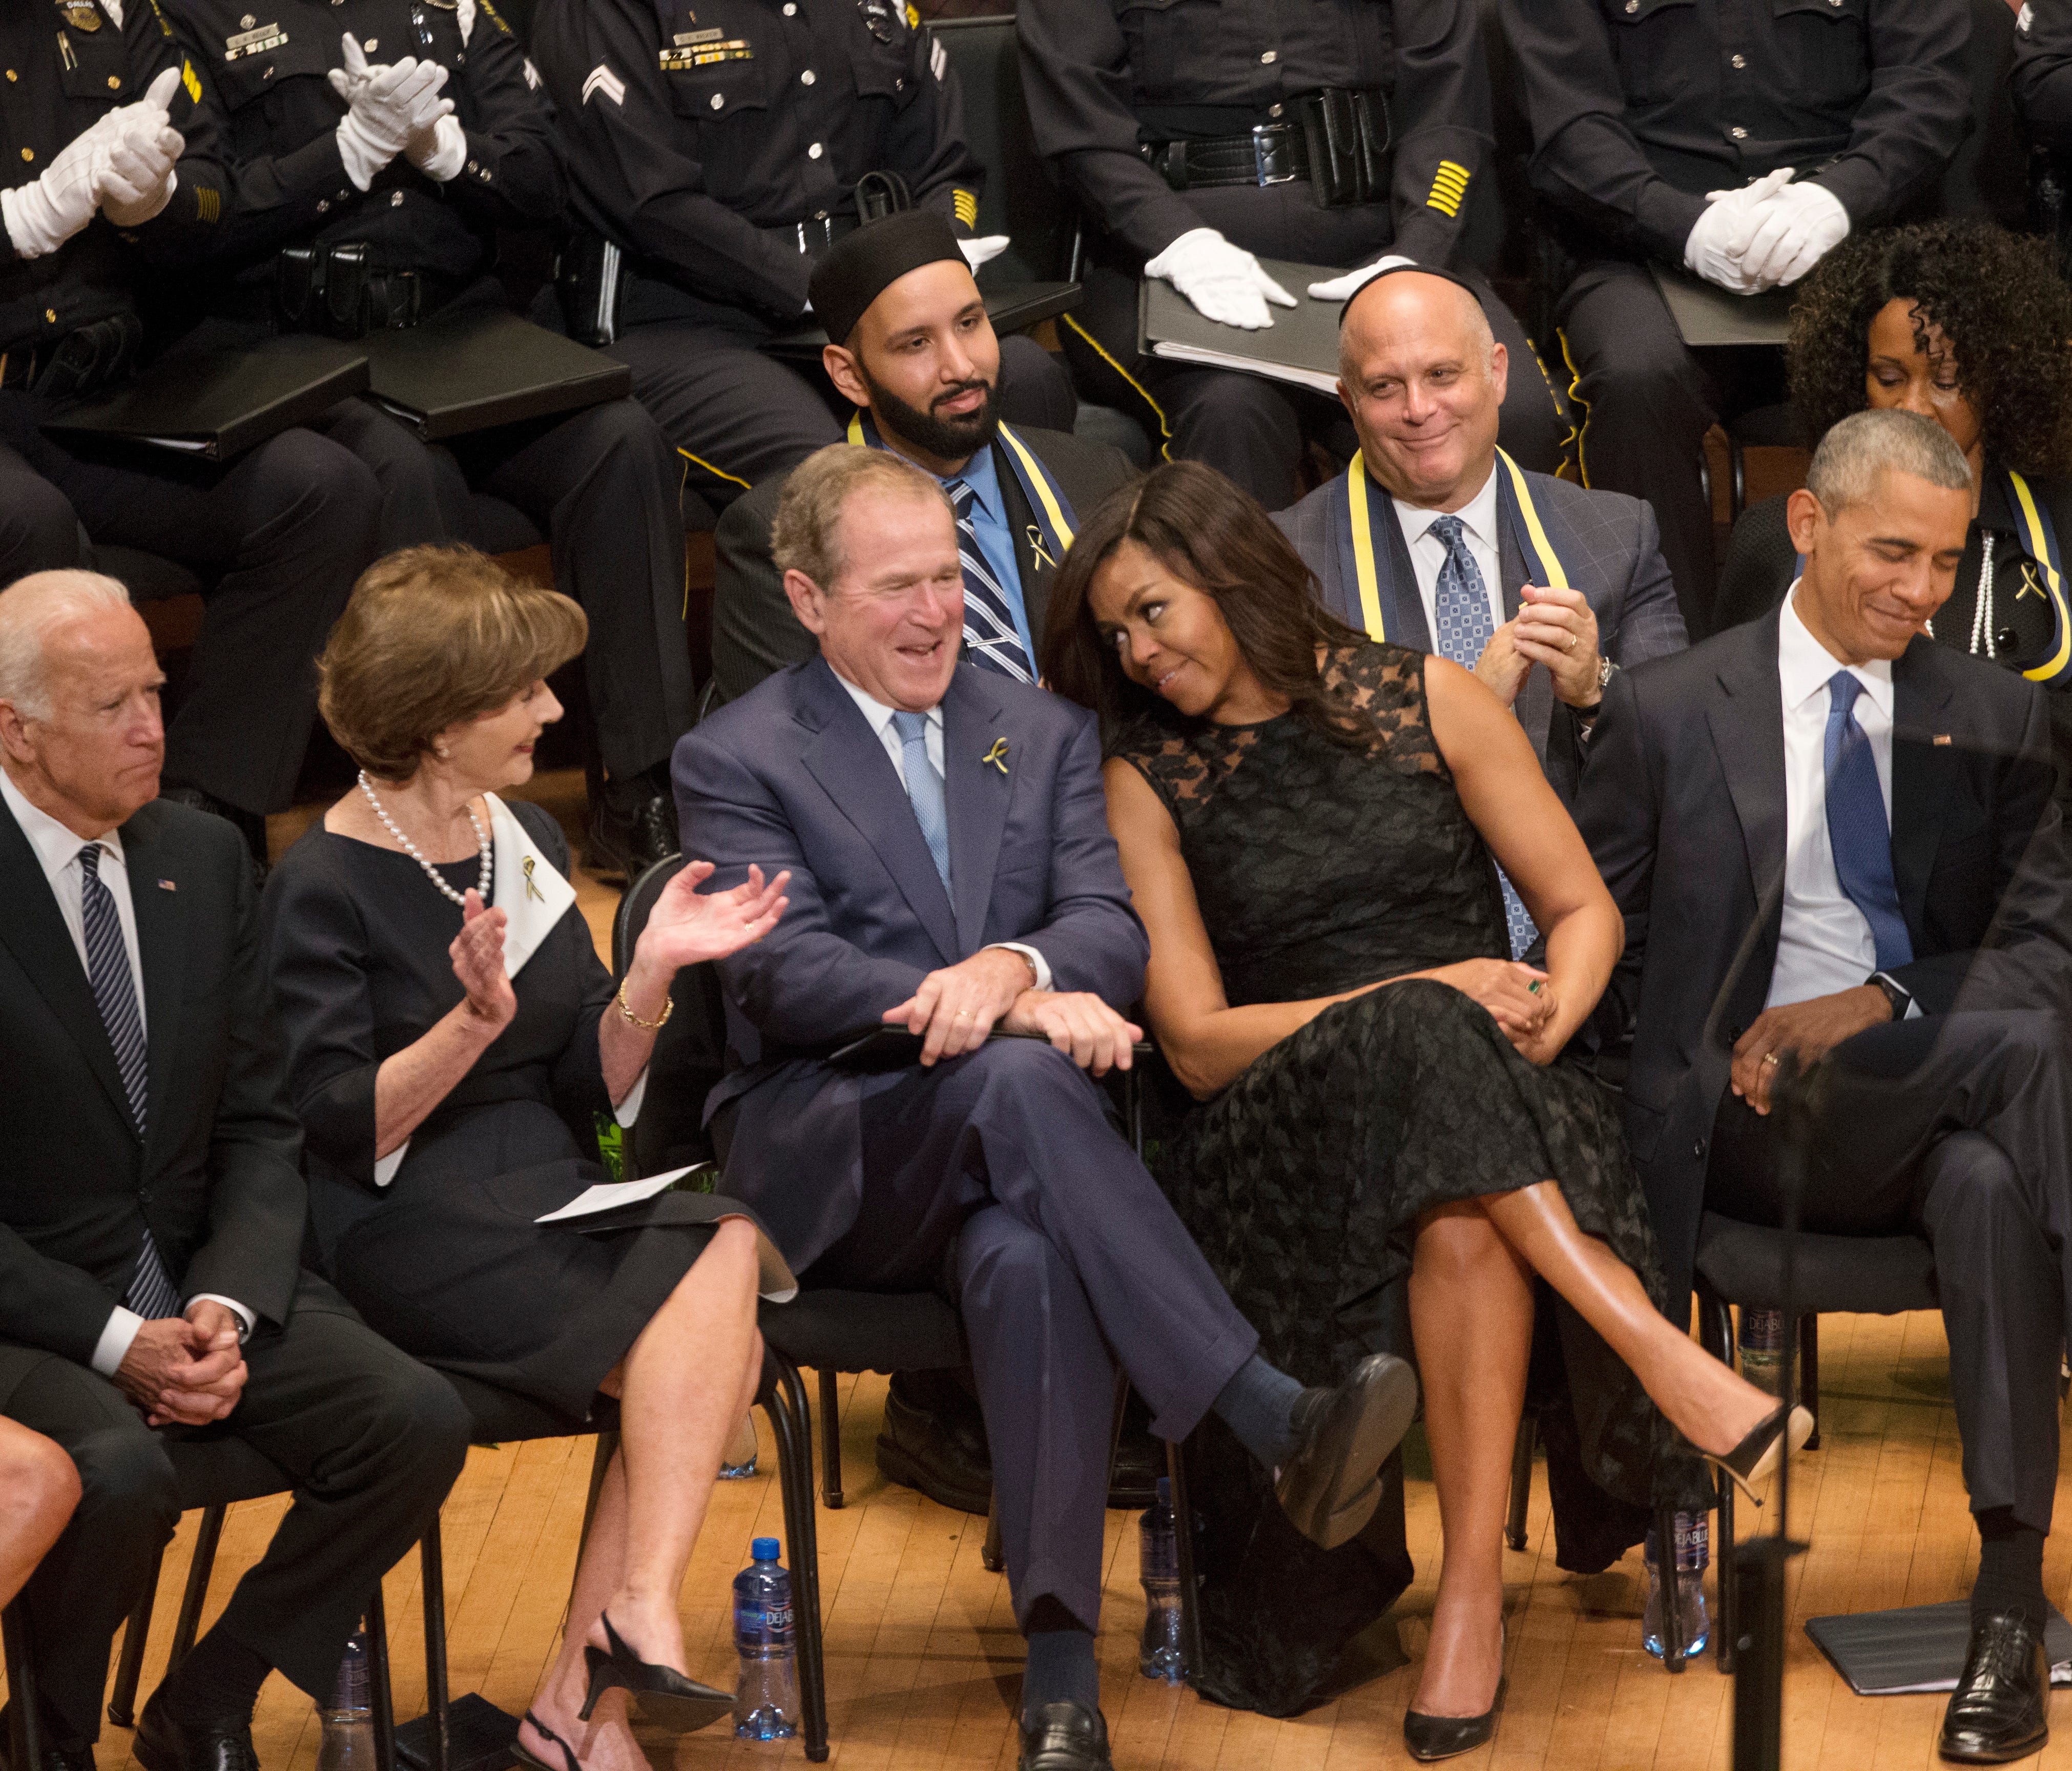 Former presidents Barack Obama and George W. Bush, former first ladies Michelle Obama and Laura Bush, and former vice president Joe Biden, in Dallas, on July 12, 2016.